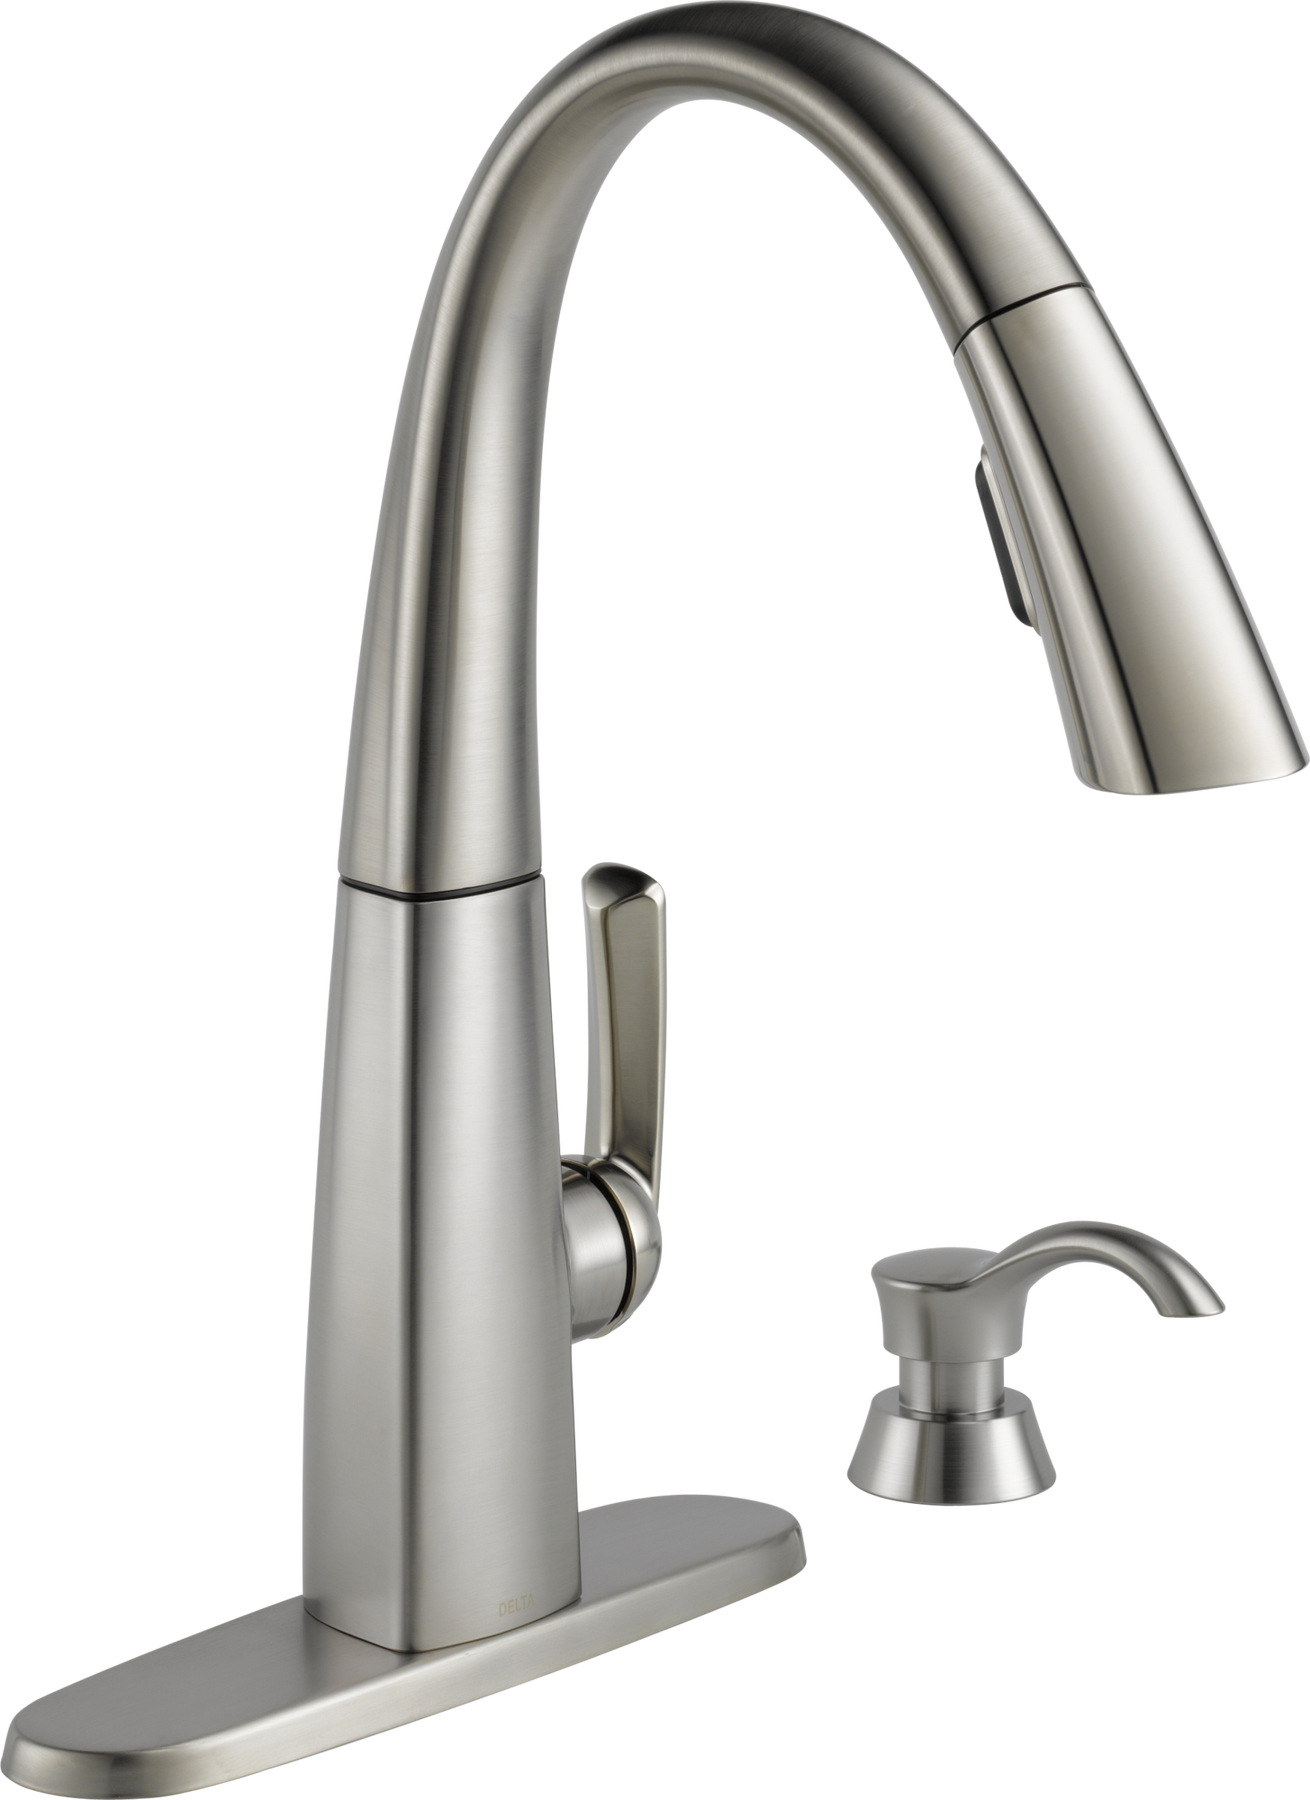 Glacier Bay Market Single-Handle Pull-Down Spray Head in Stainless